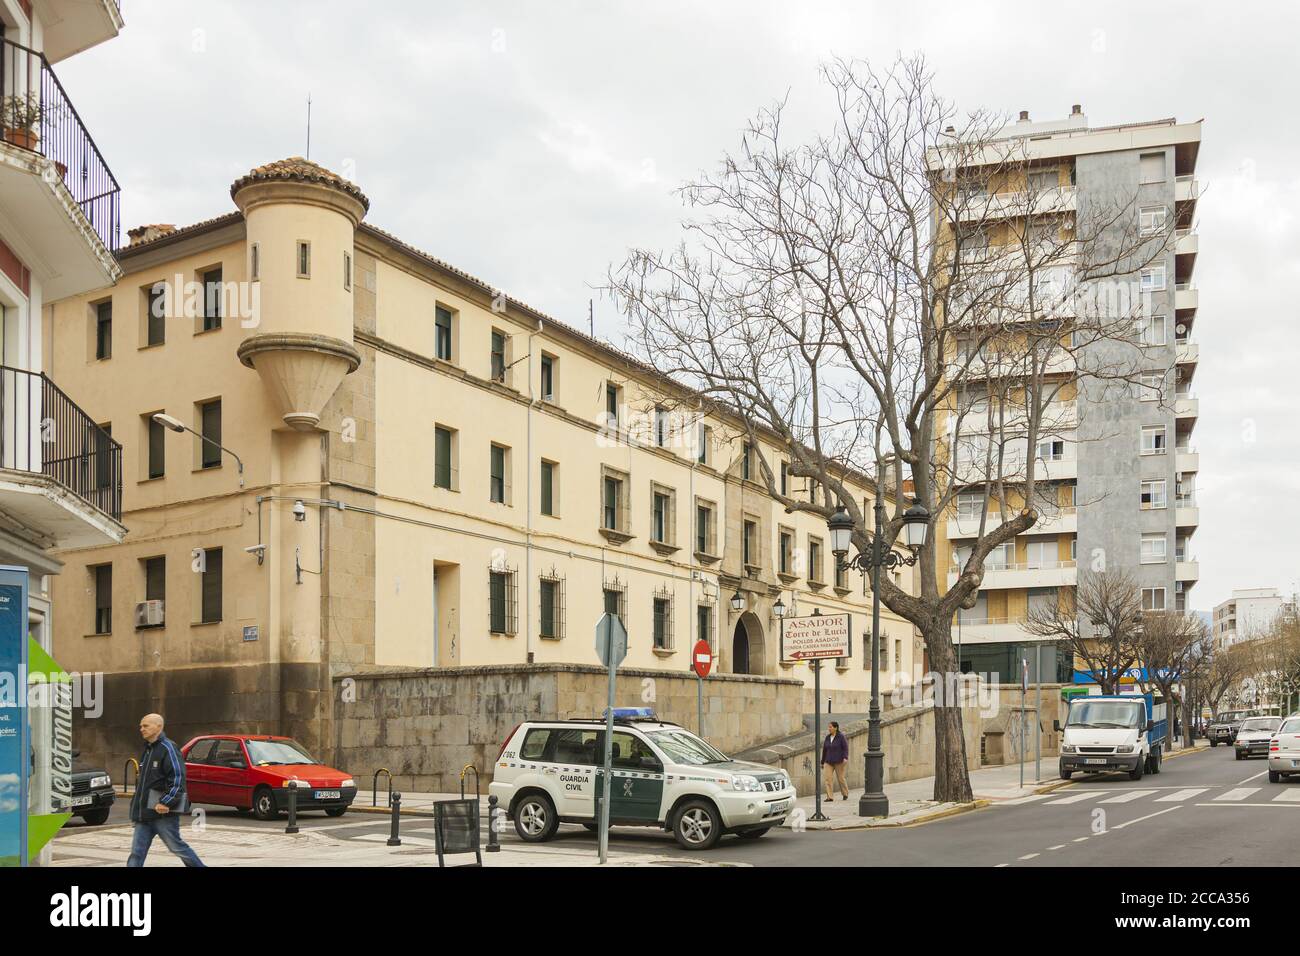 PLASENCIA, SPAIN - Mar 16, 2012: Barracks house of Guardia Civil in Plasencia, a village of Caceres province, Extremadura, Spain. Buildings. Stock Photo